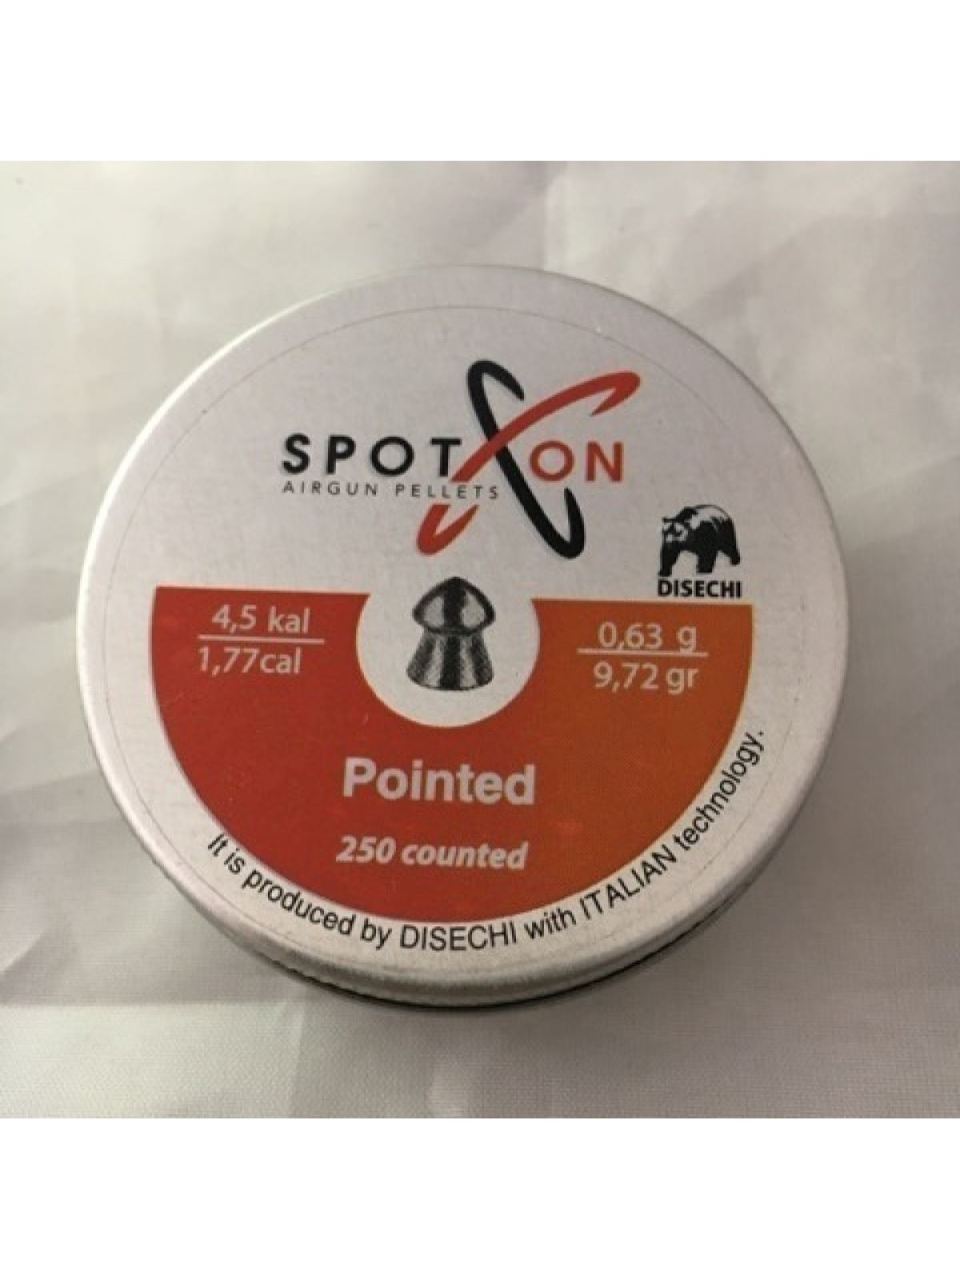 SPOTON POİNTED 4.5 CAL PELLET